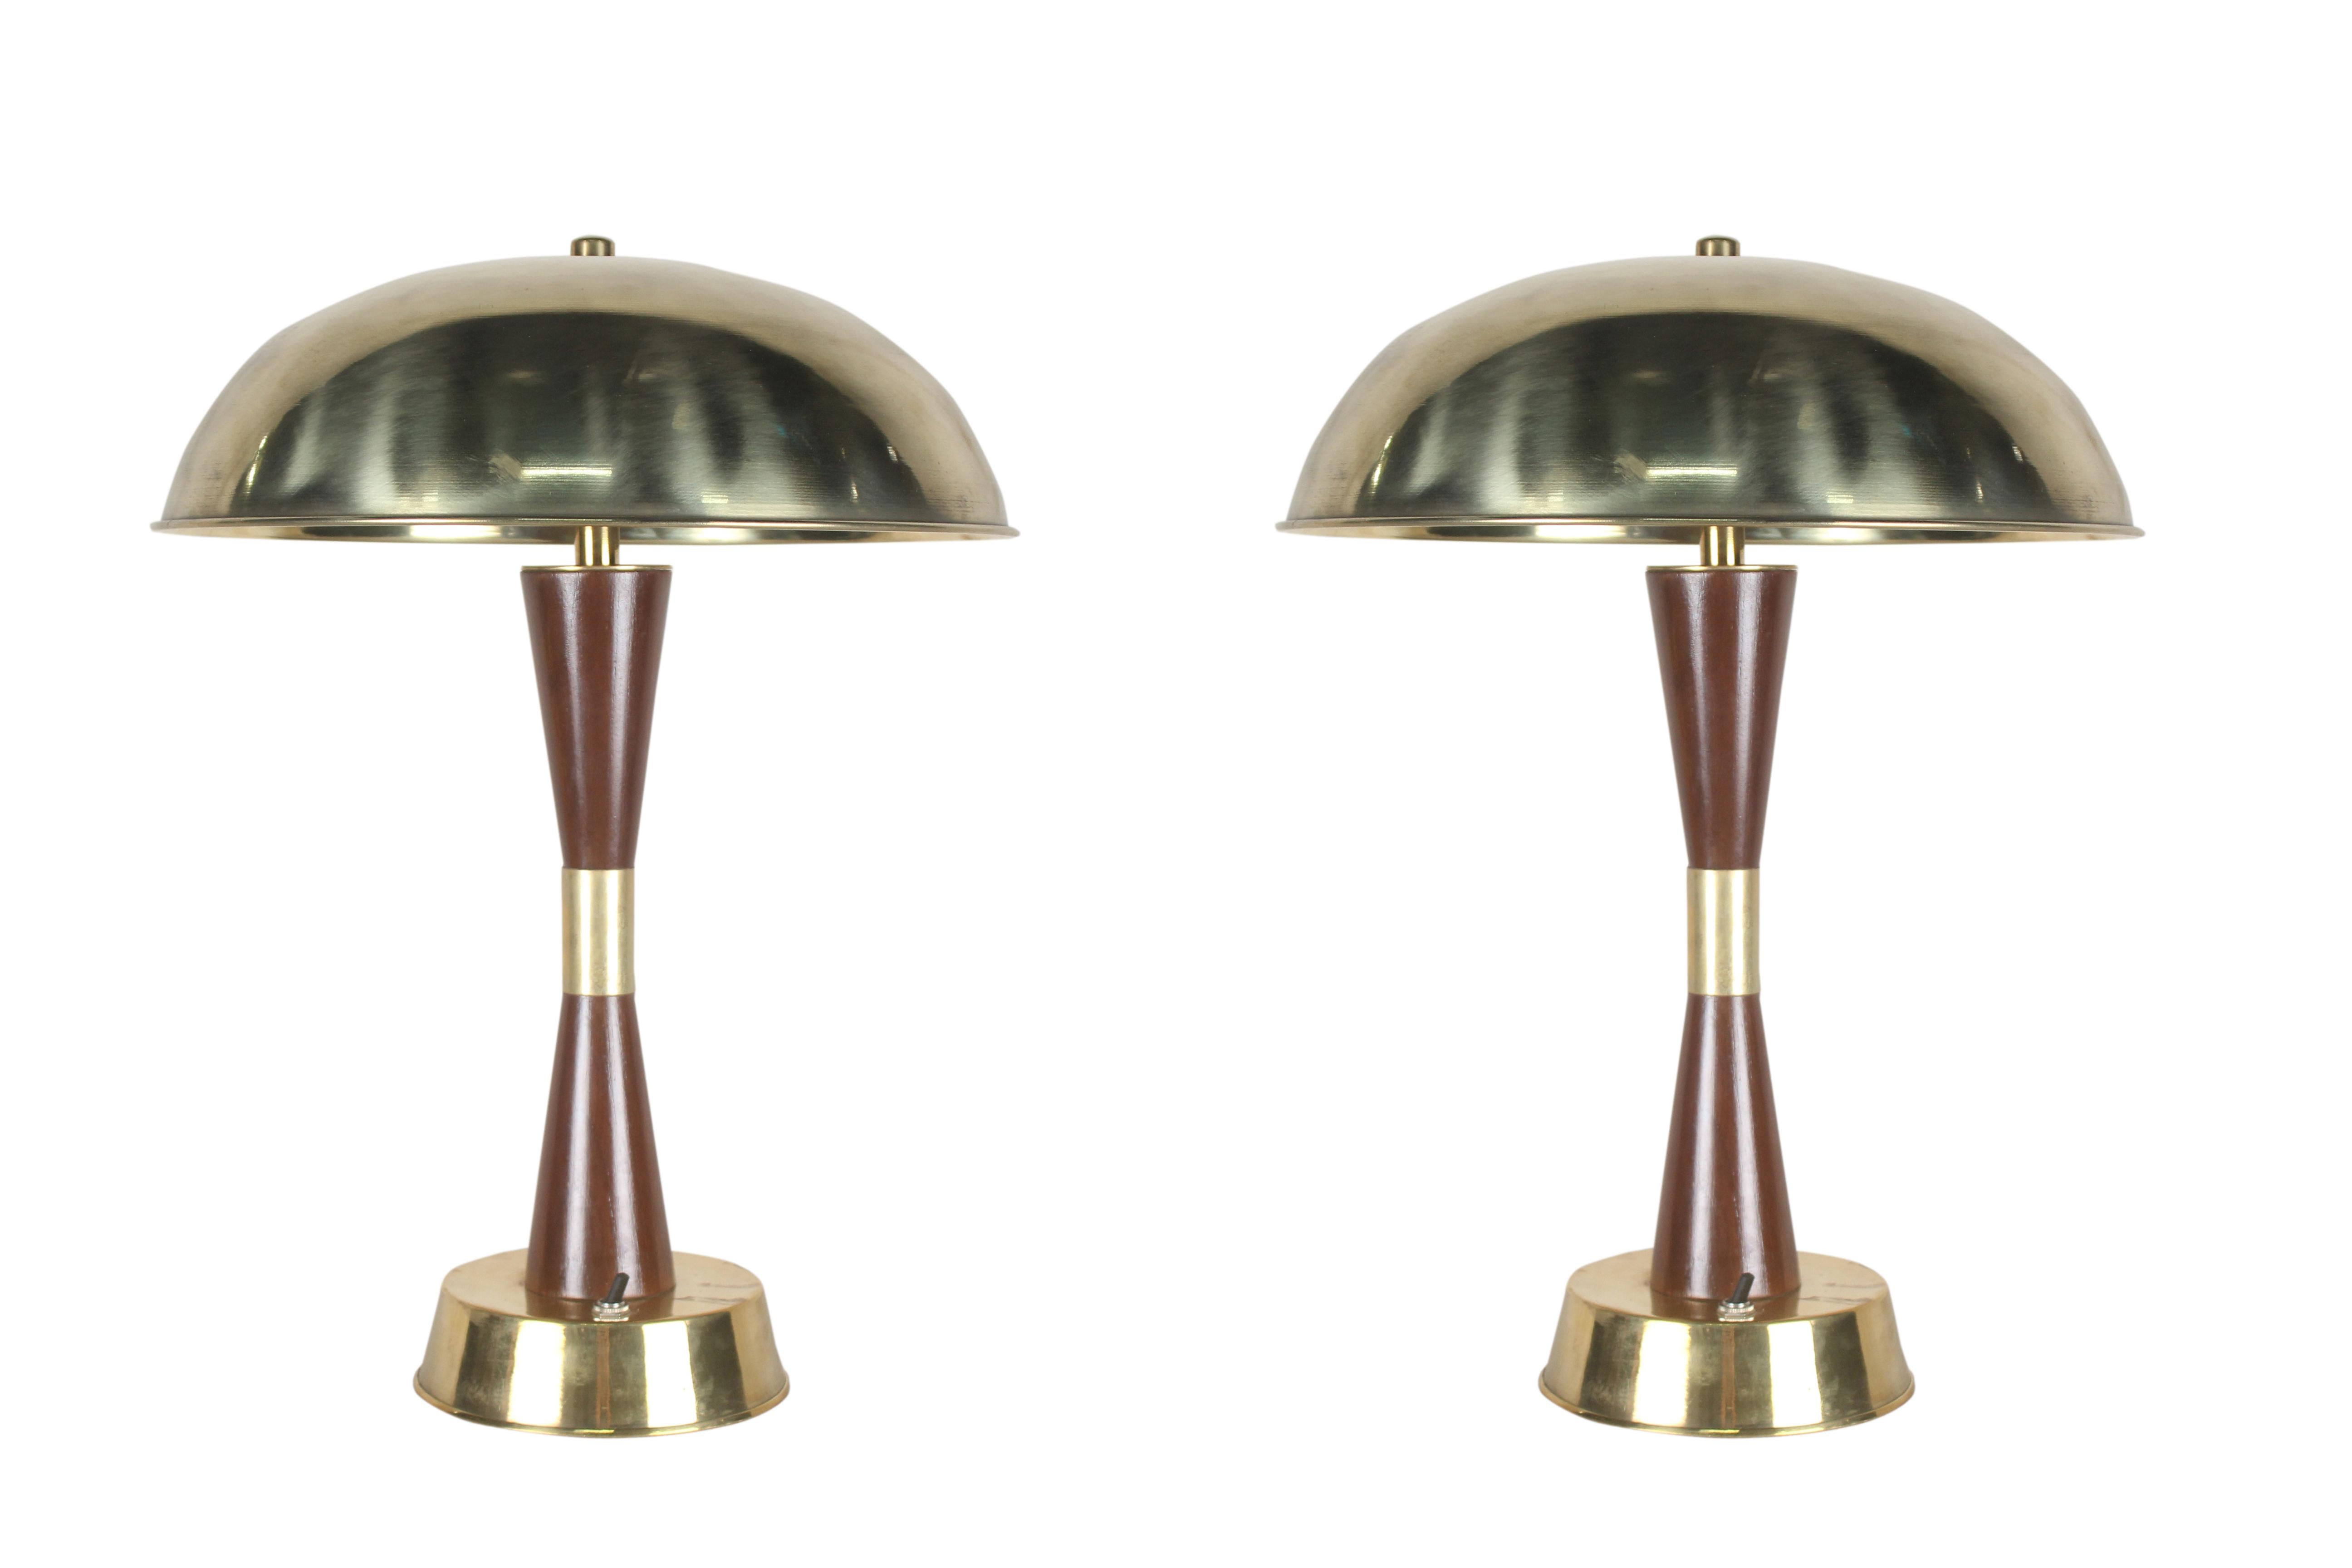 A handsome pair of teak and brass table lamps from the stateroom of a decommissioned cruise ship. 1980's. On/off switch at base. Rewired for American use. Base diameter is 6